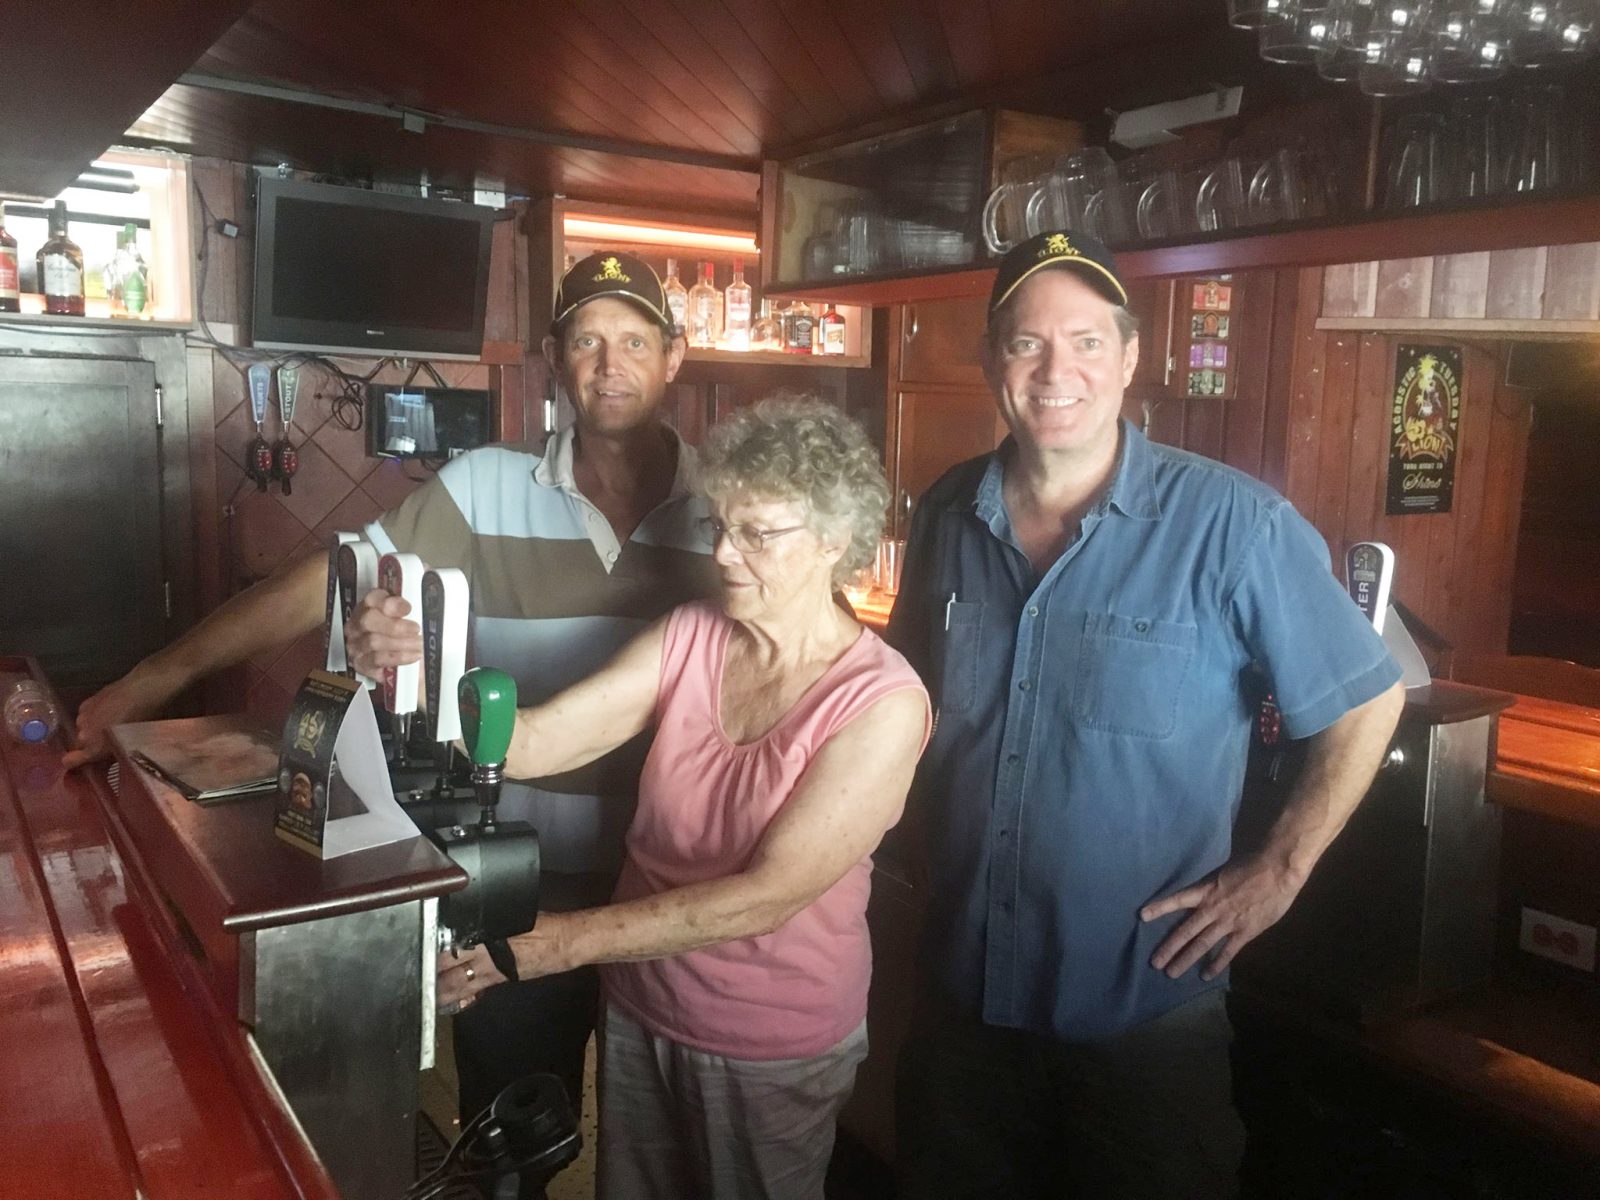 The Lion Pub’s 45th anniversary: A reunion to remember